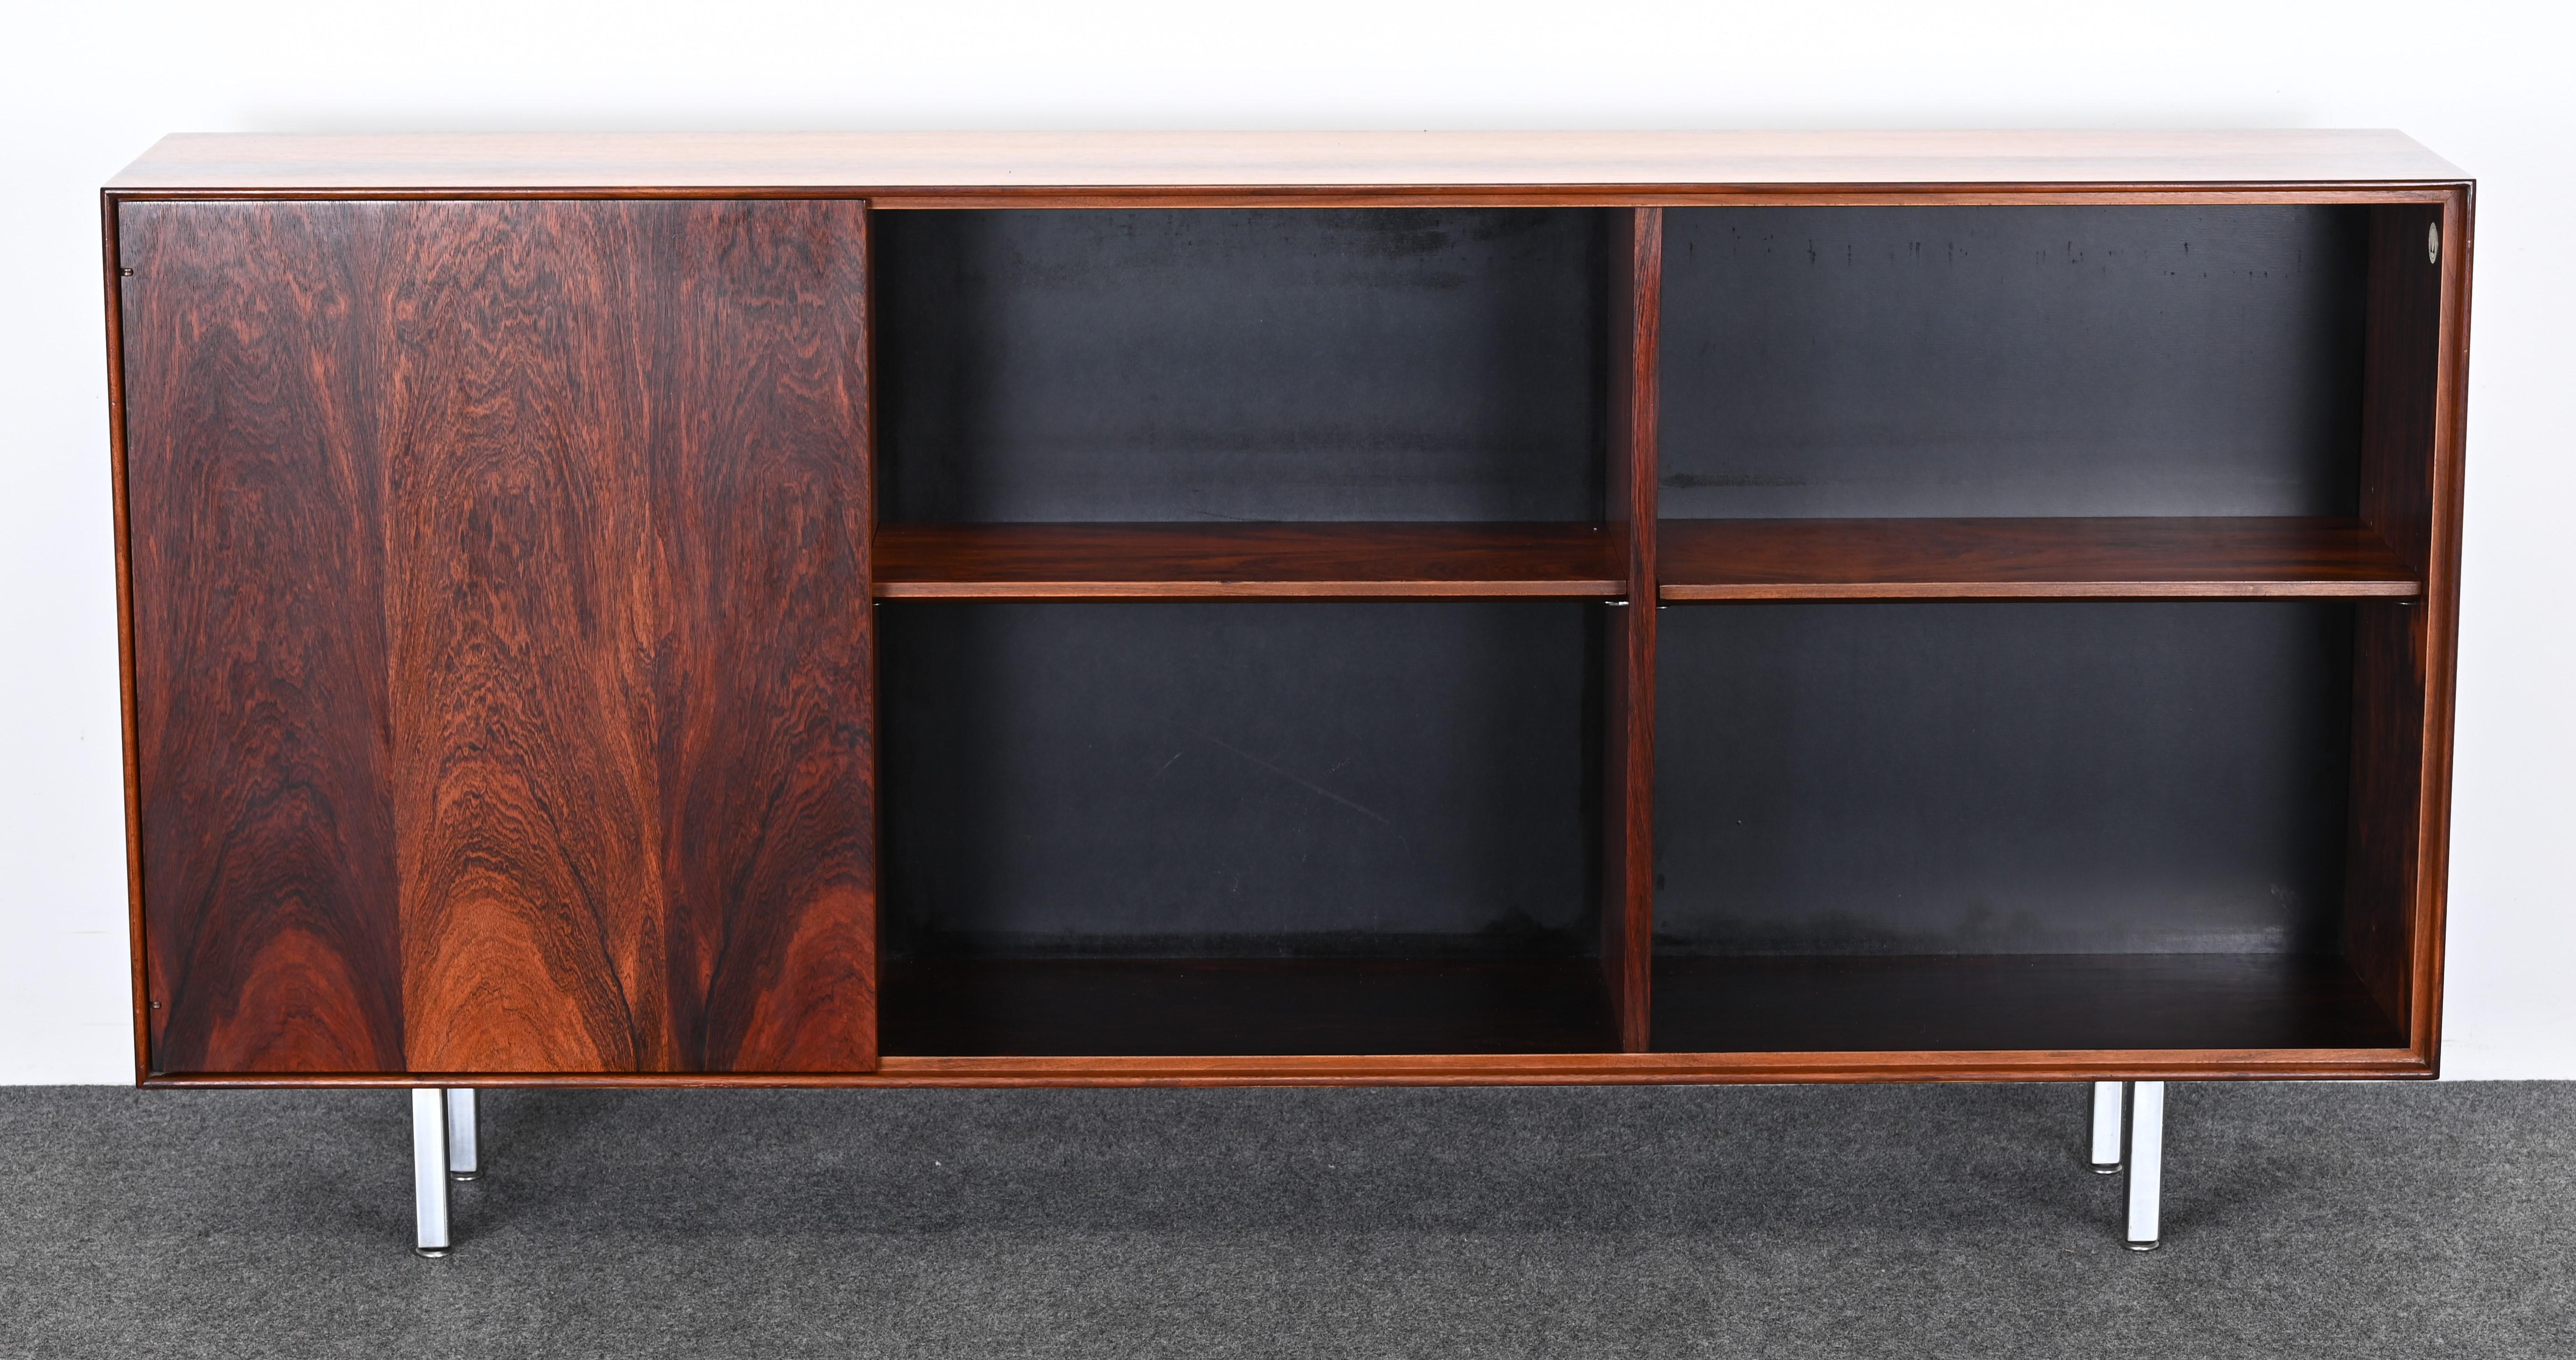 A beautiful rare and hard-to-find Rosewood Thin Edge bookcase by George Nelson for Herman Miller. The Thin Edge bookcase would look great in any Mid-Century Modern or Contemporary home or interior. It is a great piece for the George Nelson